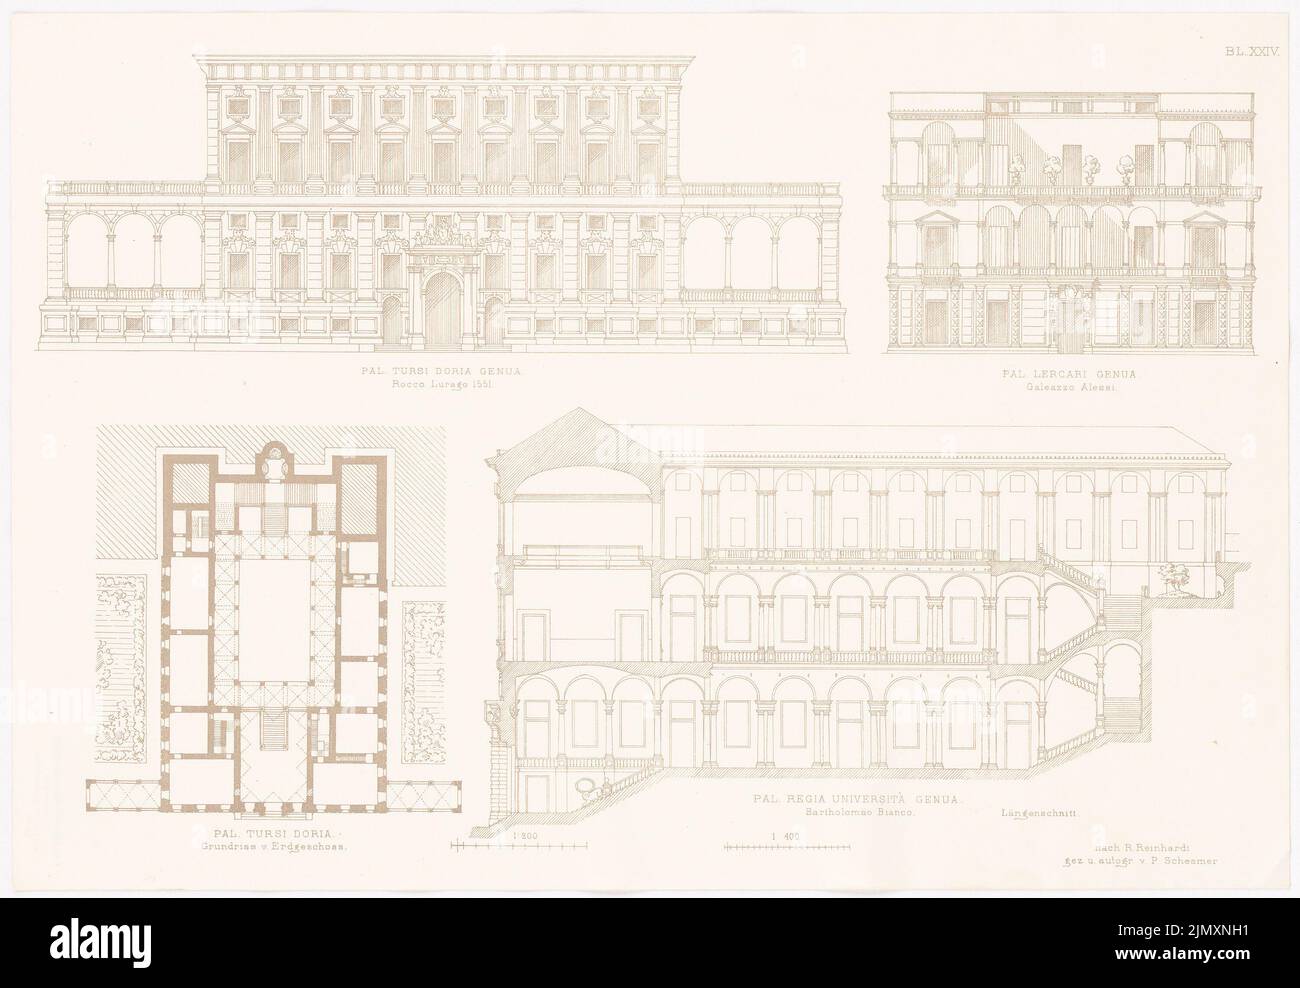 N.N., Uffizien, Florence. S. Salvatore, Venice. Sapienza, Rome. Porta Stuppa, Venice. (From: architecture d. Renaissance in Italy and Spain, ed. V. Character output d. Stud. TH Berlin, 1875): View, floor plan, cross -section, cross -section S. Salvatore, cross -section sapienza, view porta stuppa. Print on paper, 35.9 x 52 cm (including scan edges) Stock Photo